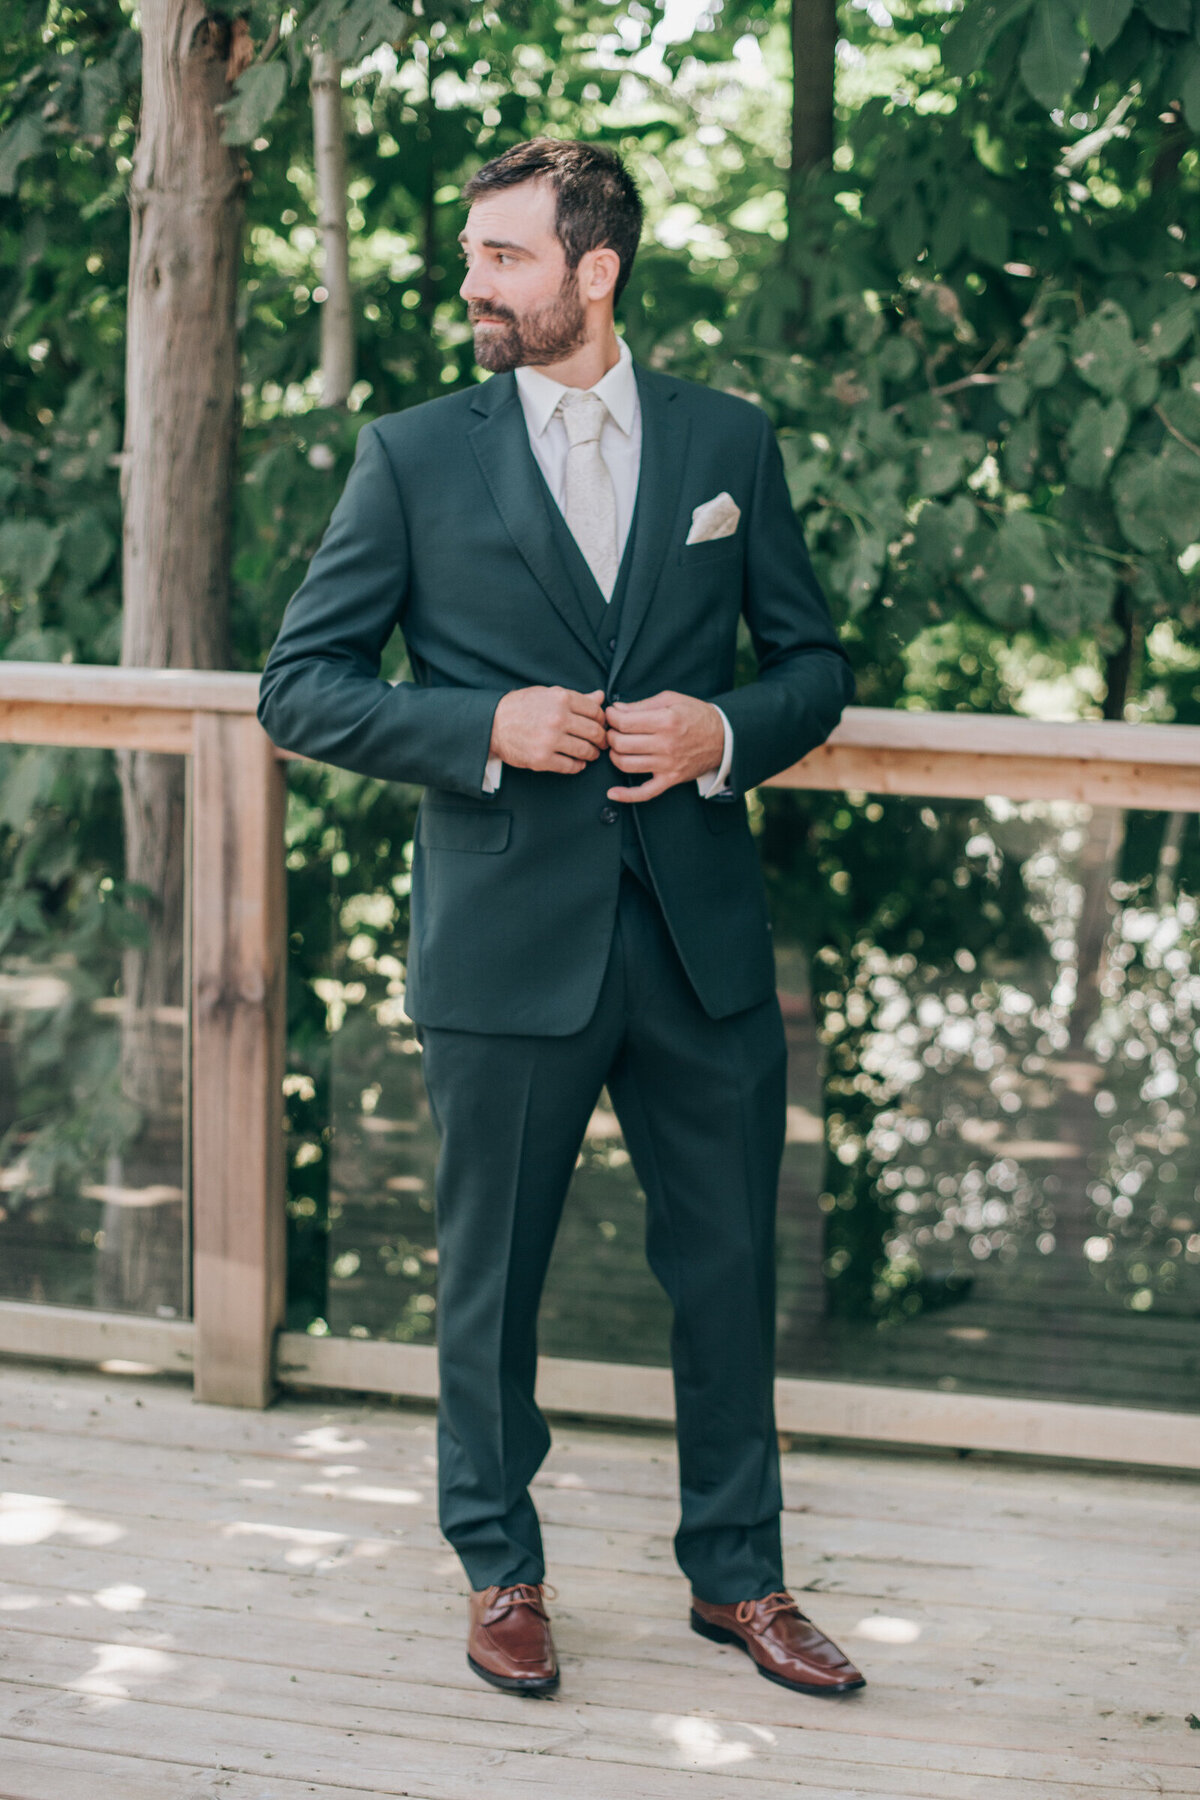 A groom in a green suit posing for photos